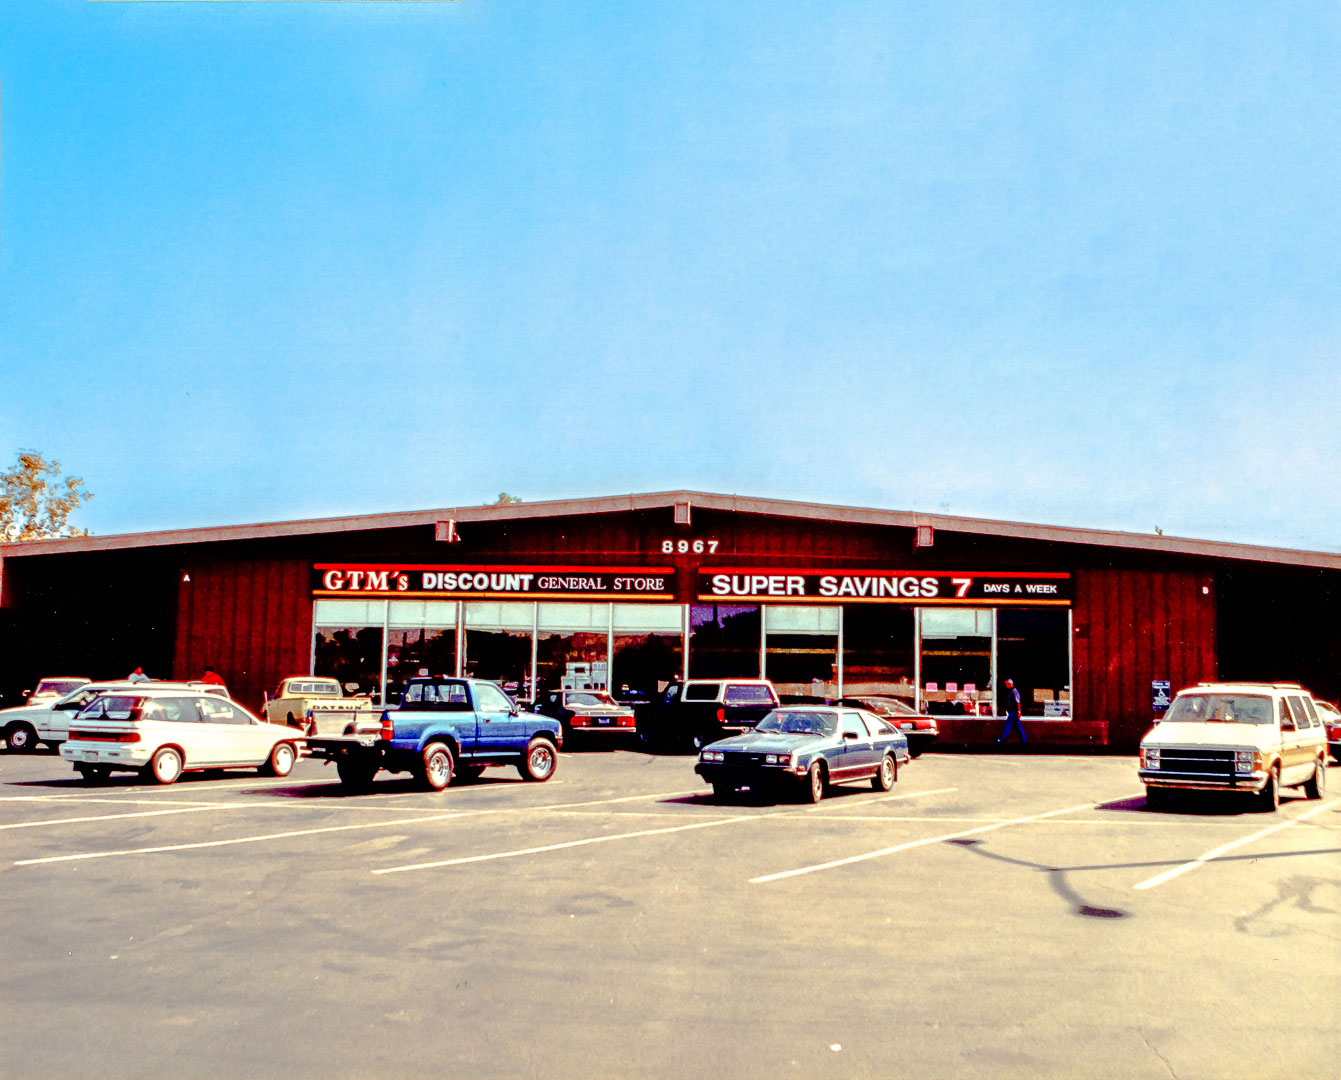 santee gtm store on carlton hills off west mission gorge road - 1992 - GTM  Discount General Stores